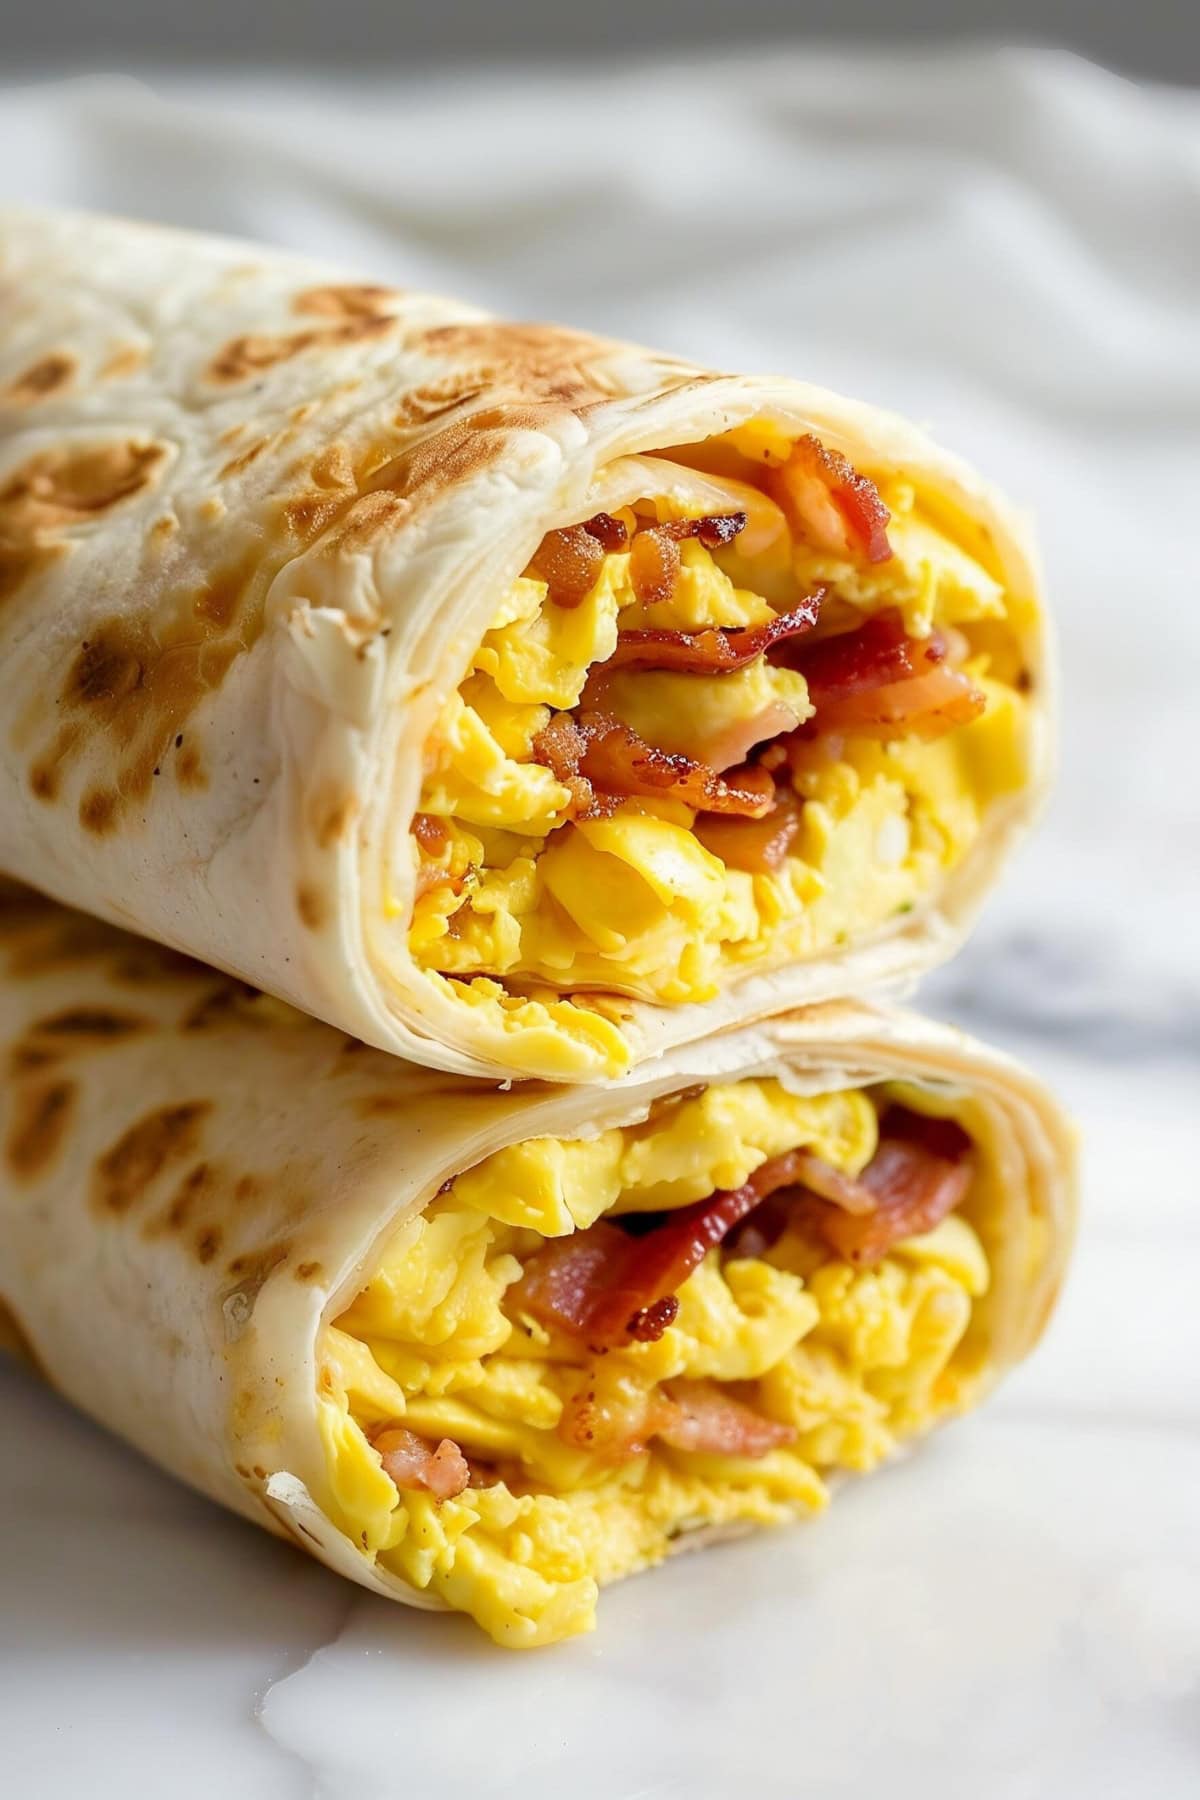 A breakfast wrap overflowing with bacon, egg and cheese.